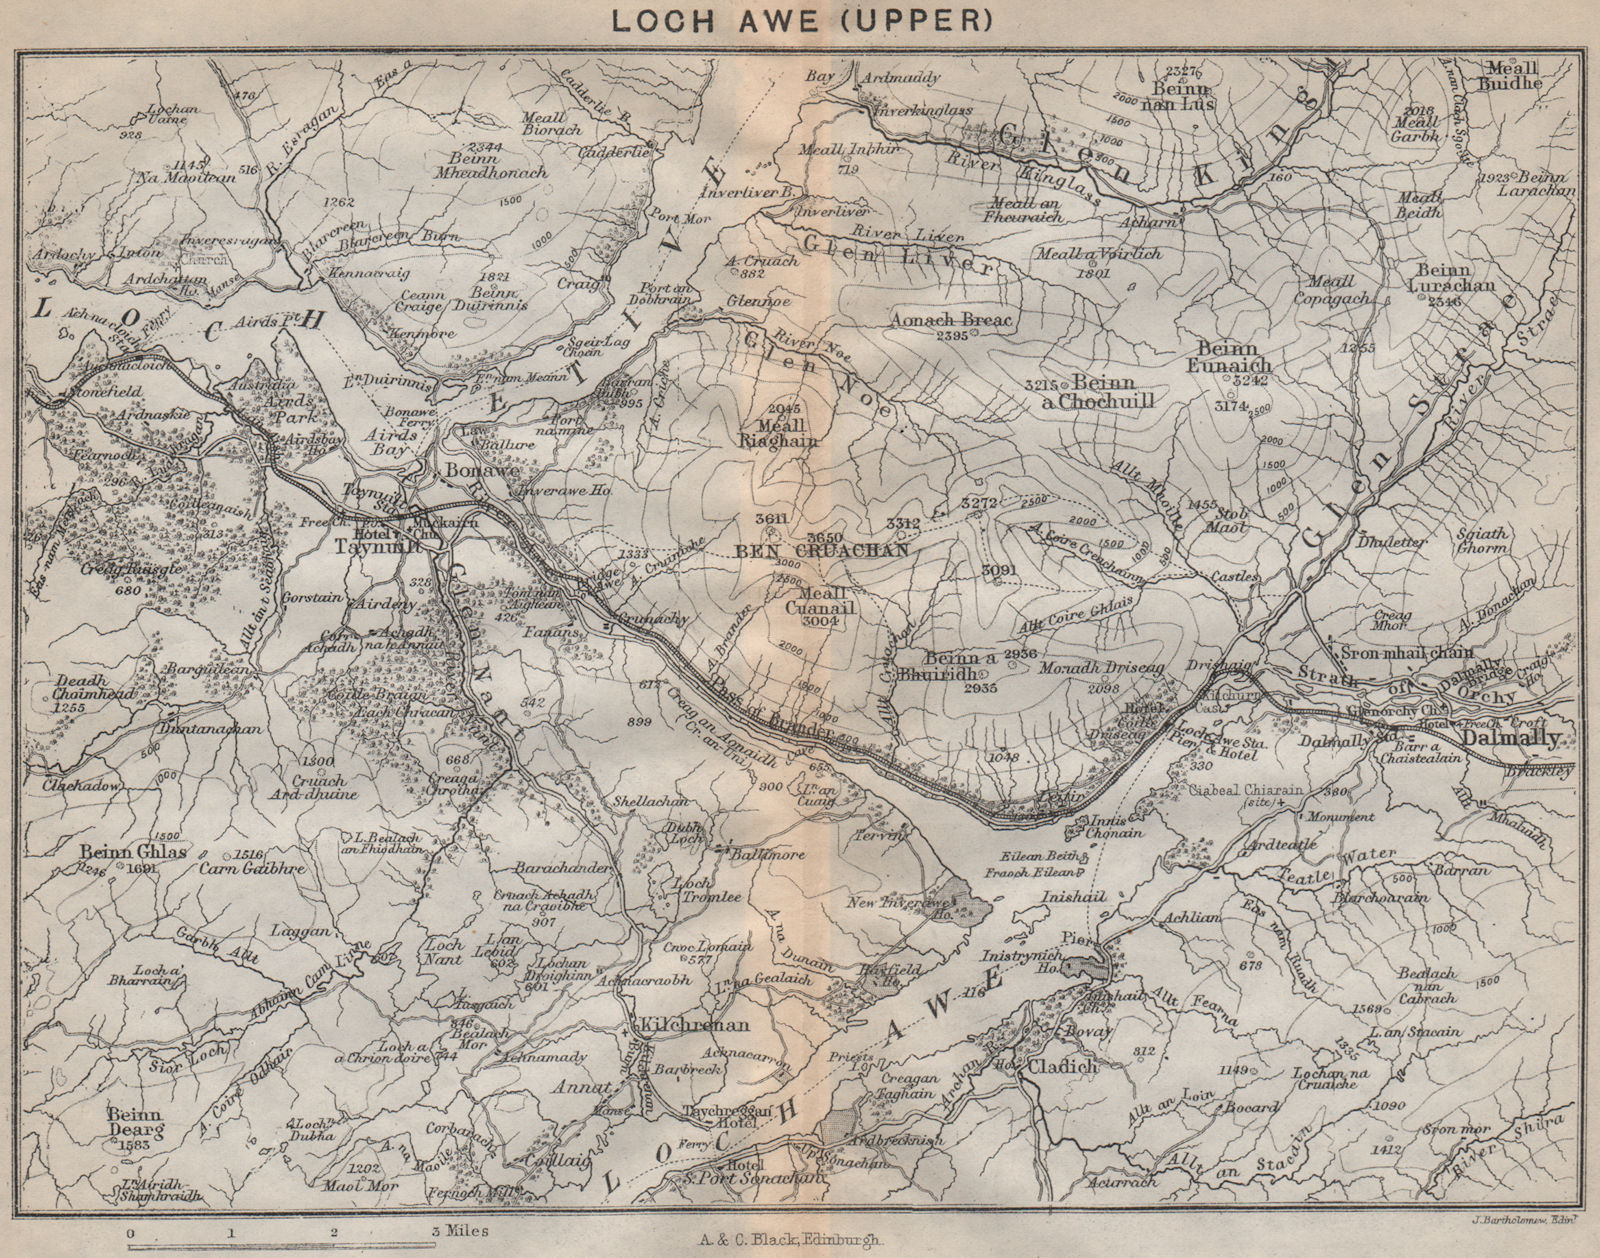 Associate Product Upper Loch Awe. Dalmally. Scotland 1886 old antique vintage map plan chart